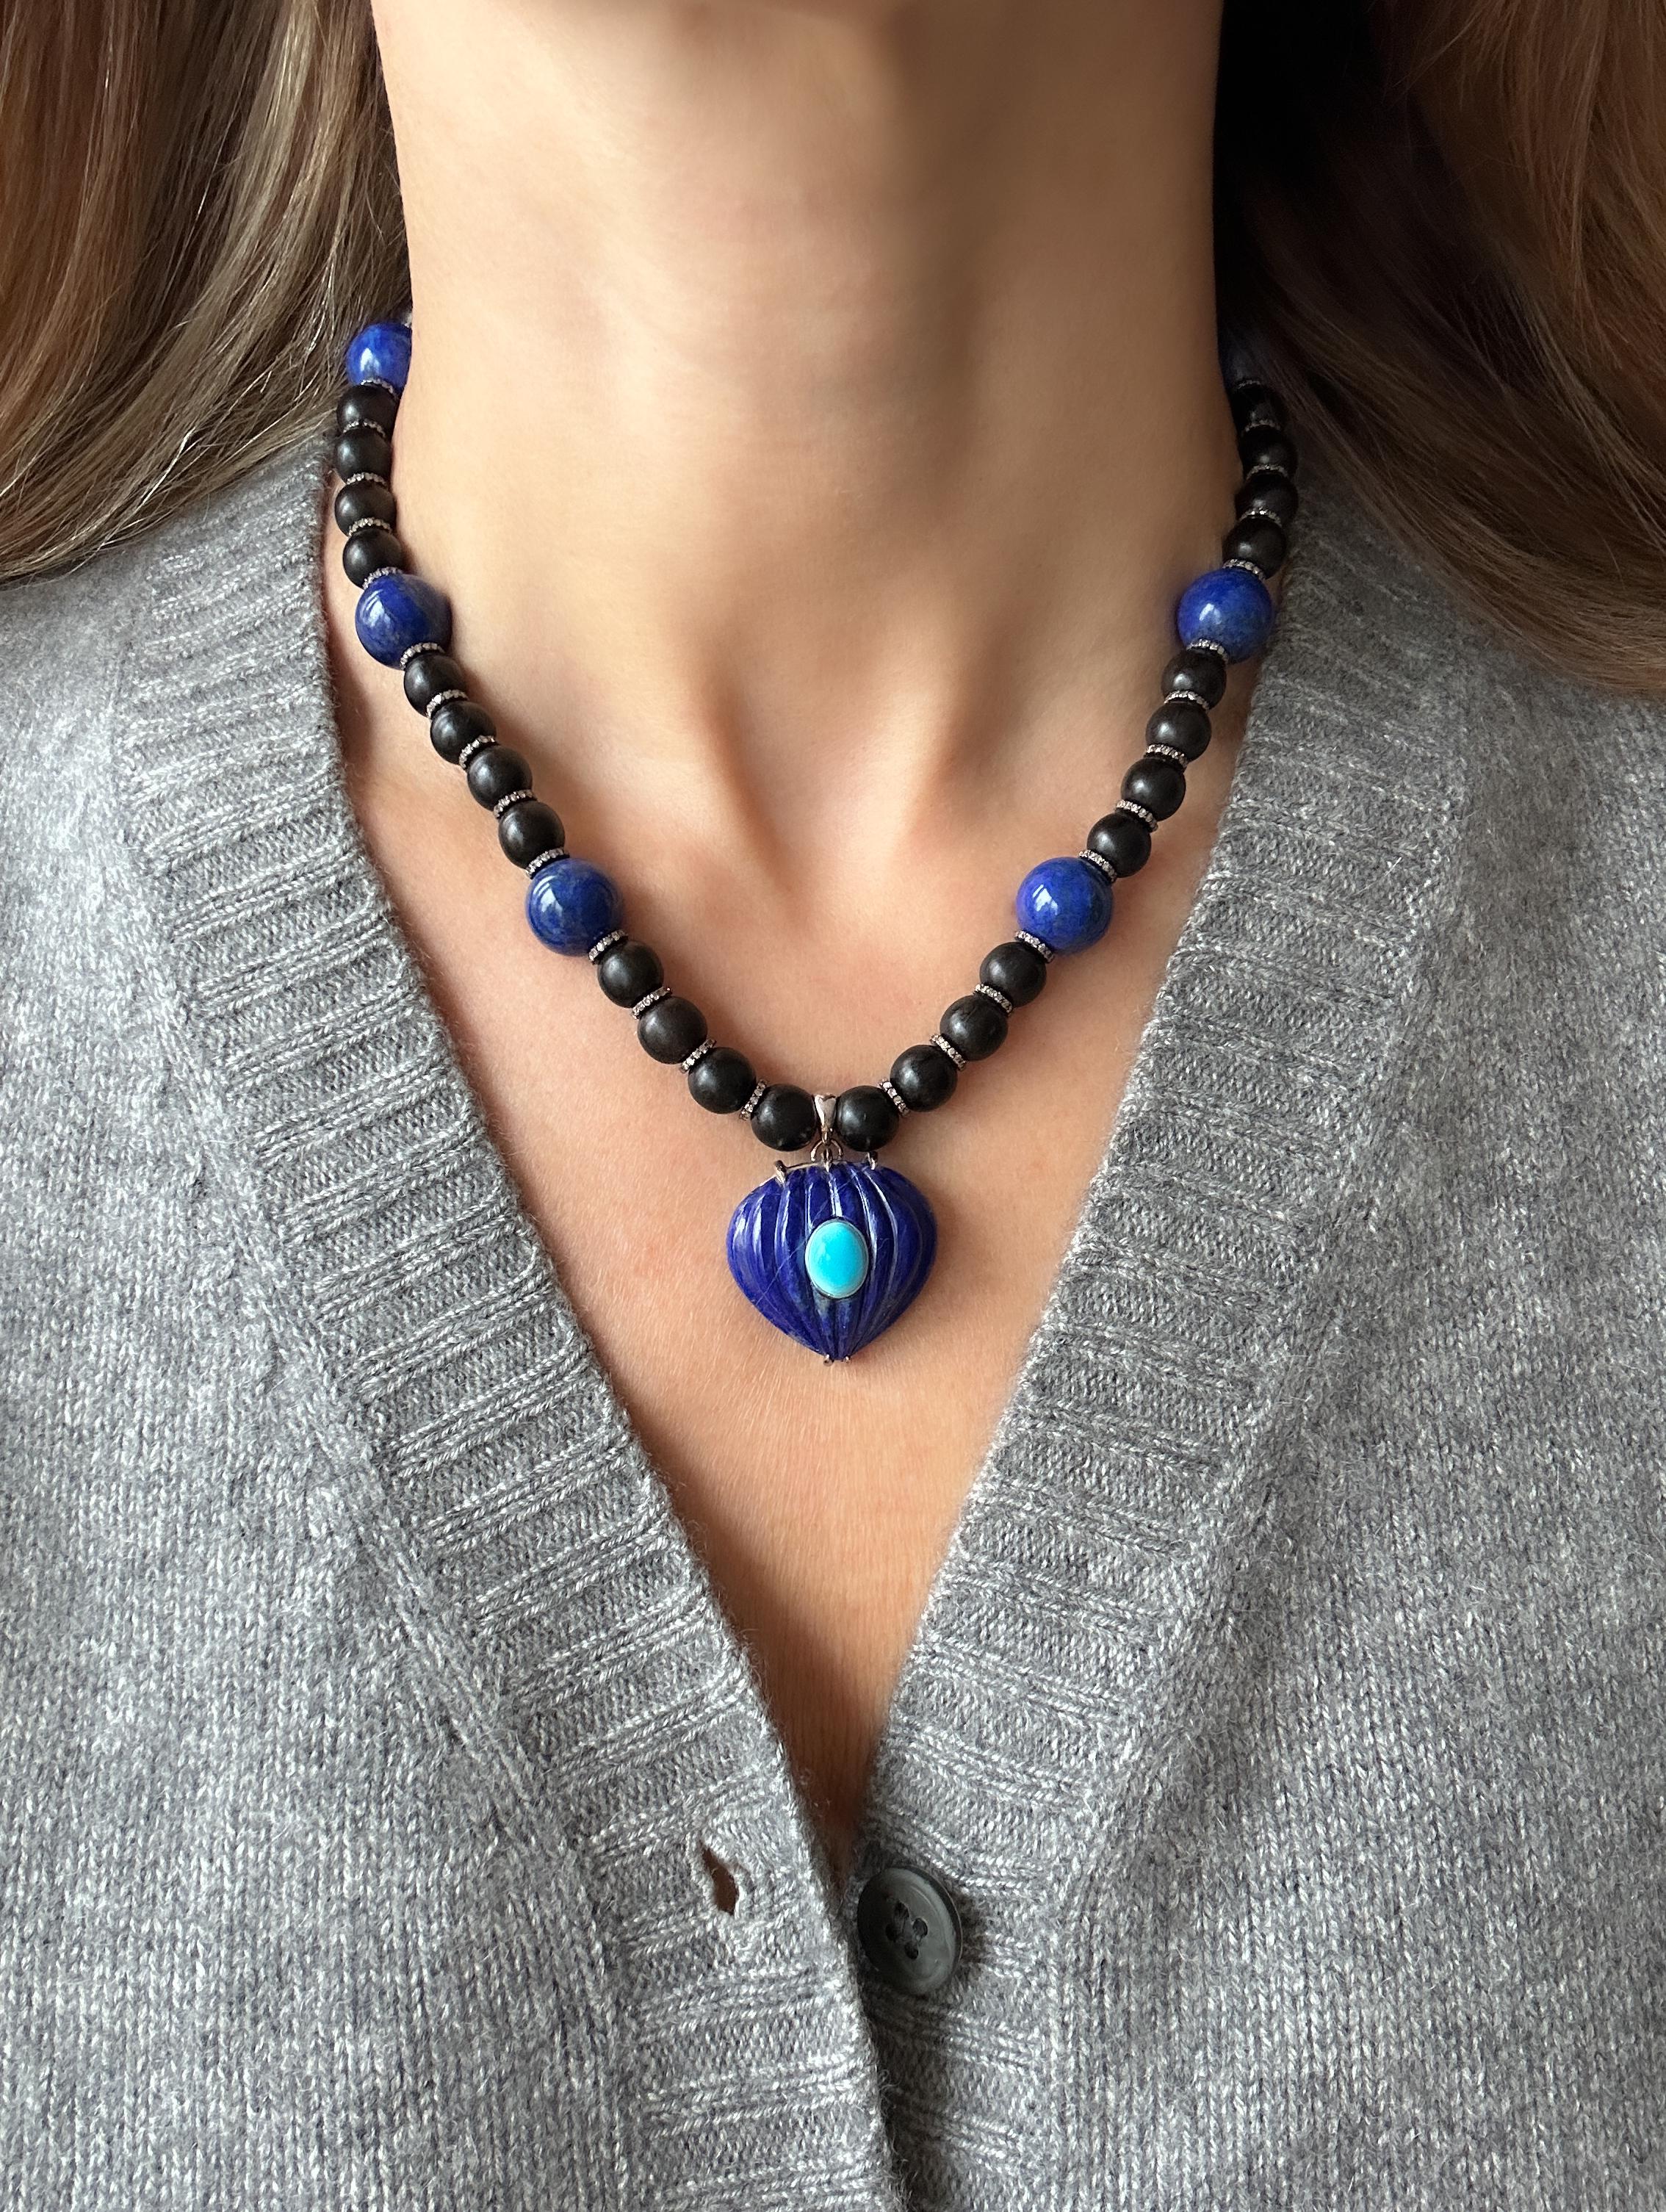 The necklace is composed of ebony and lapis lazuli beads separated by diamond rondelles, a lapis lazuli carved pendant set in white gold prongs, and incrusted with a turquoise cabochon. The diamond rondelles are set in S/S and the oval turquoise